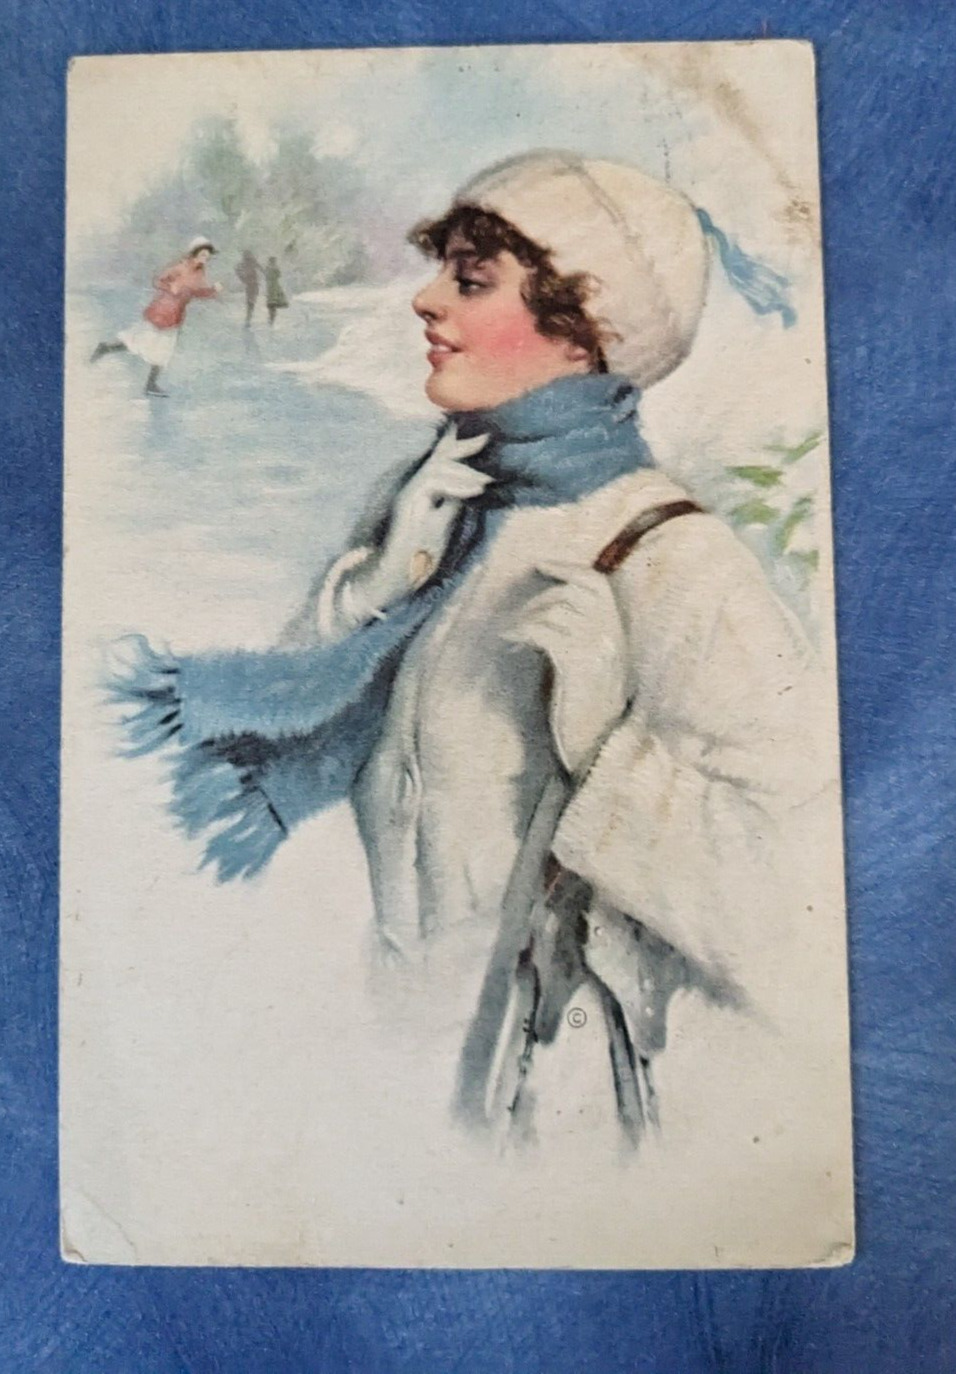 1920 Pretty Brunette Woman Wearing Scarf + Hat In Winter Skating On Pond